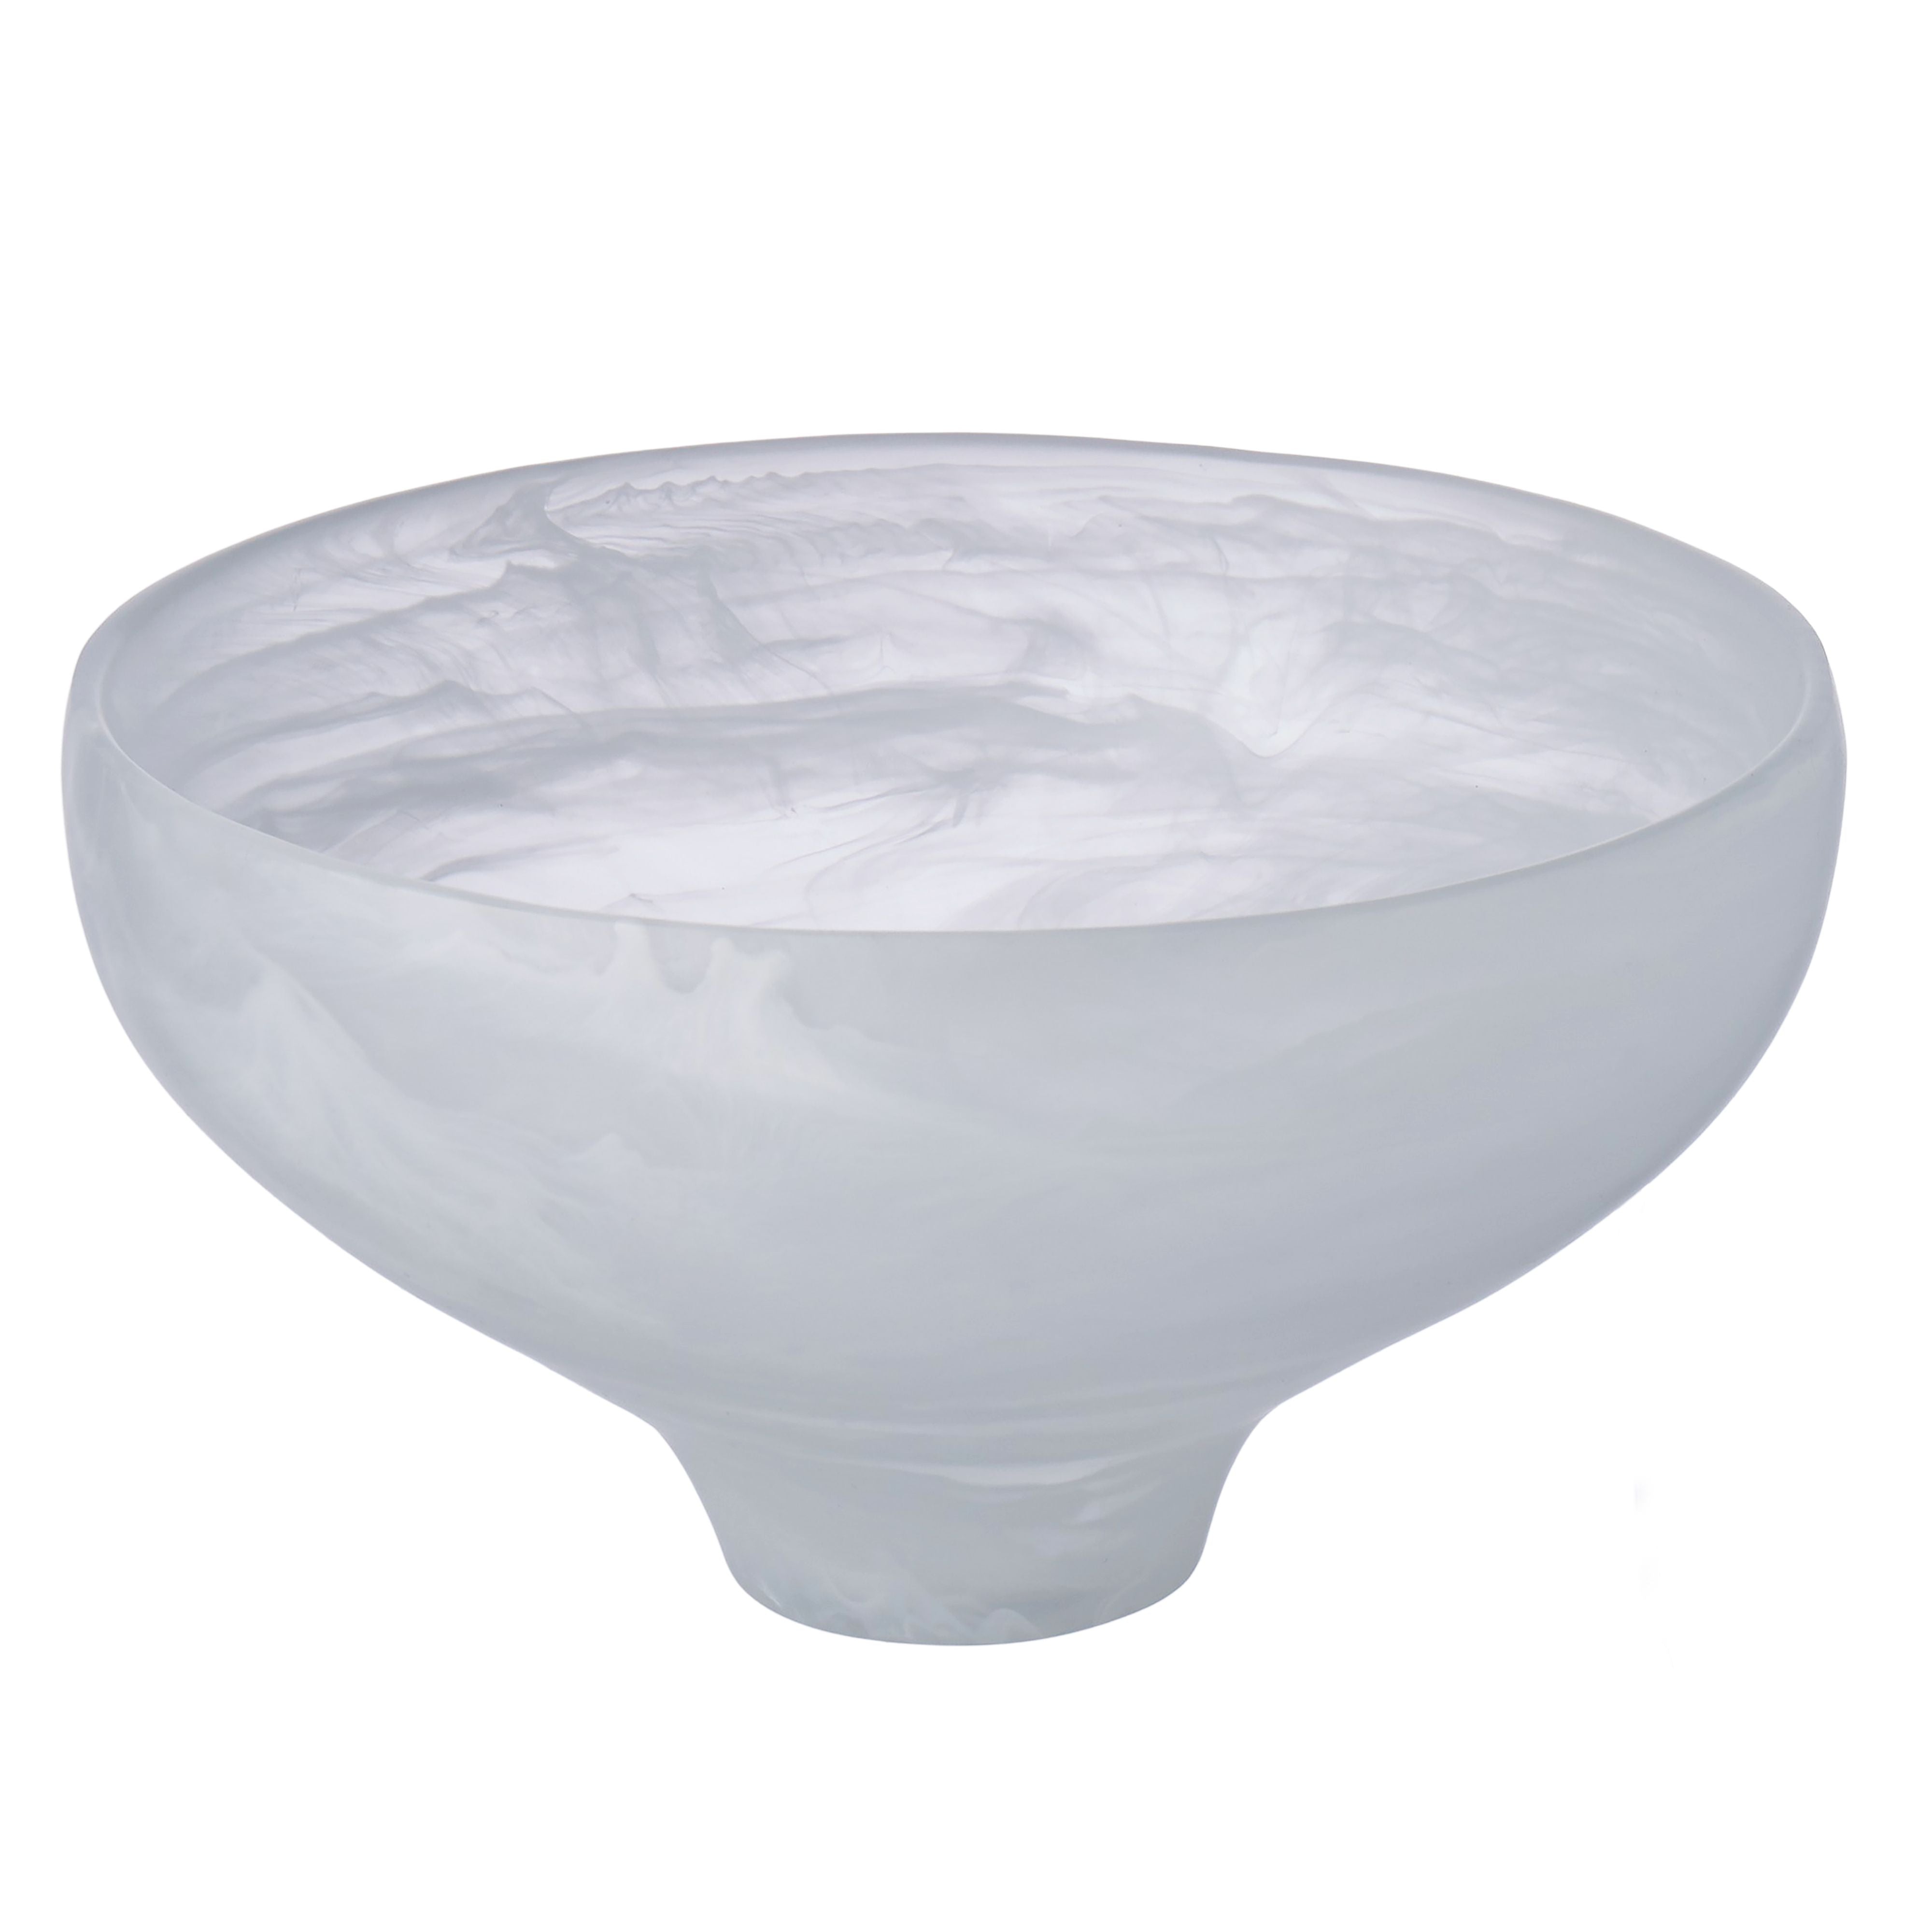 Aerial Serving Bowl - White-Dining & Entertaining-Grand Designs-The Bay Room